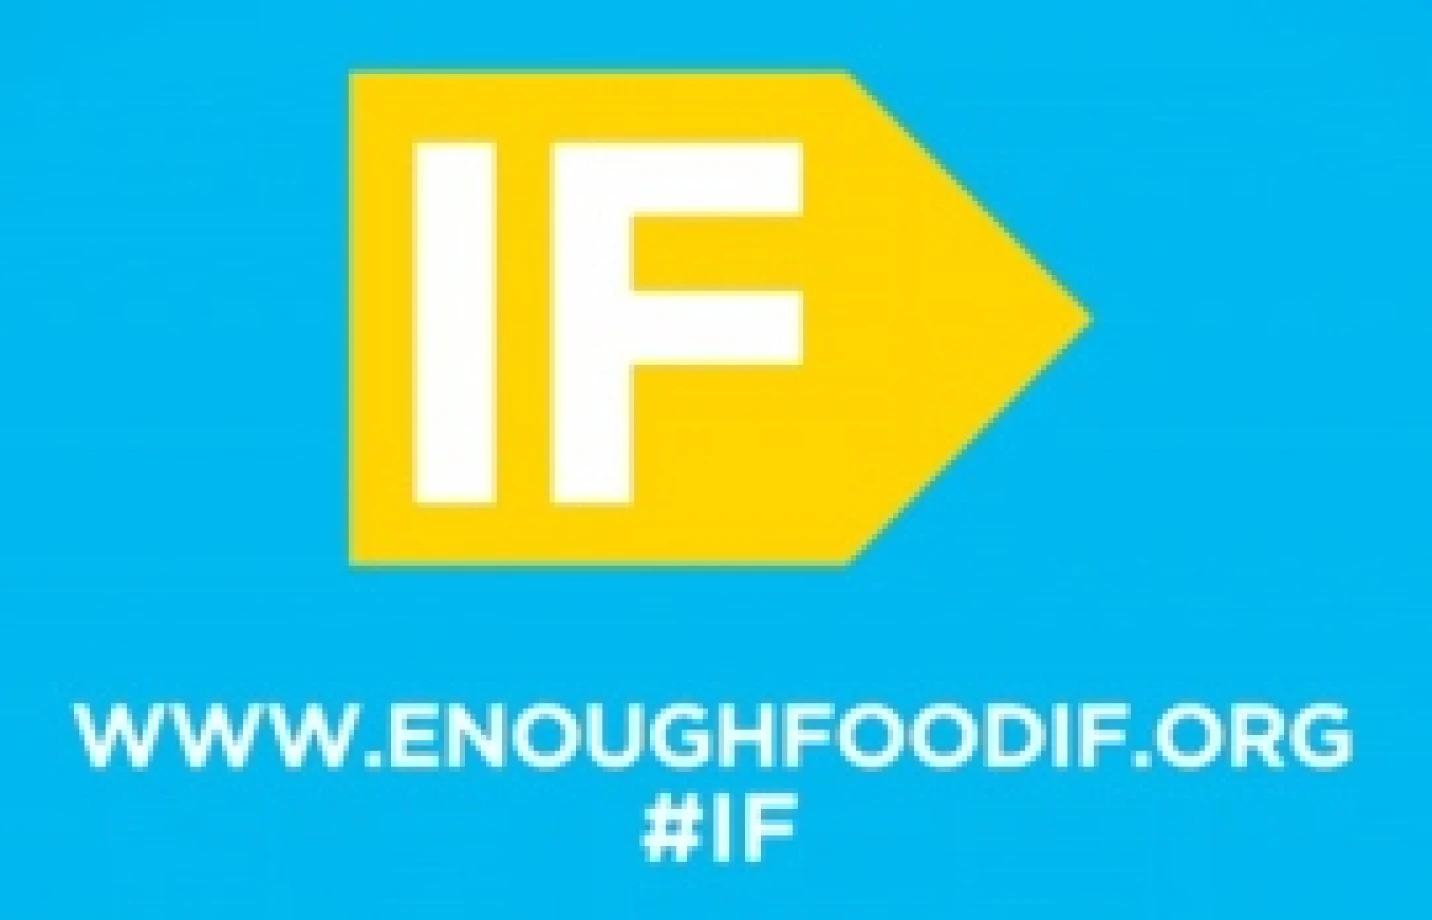 ‘Enough Food For Everyone’ – General Synod Supports the IF Campaign